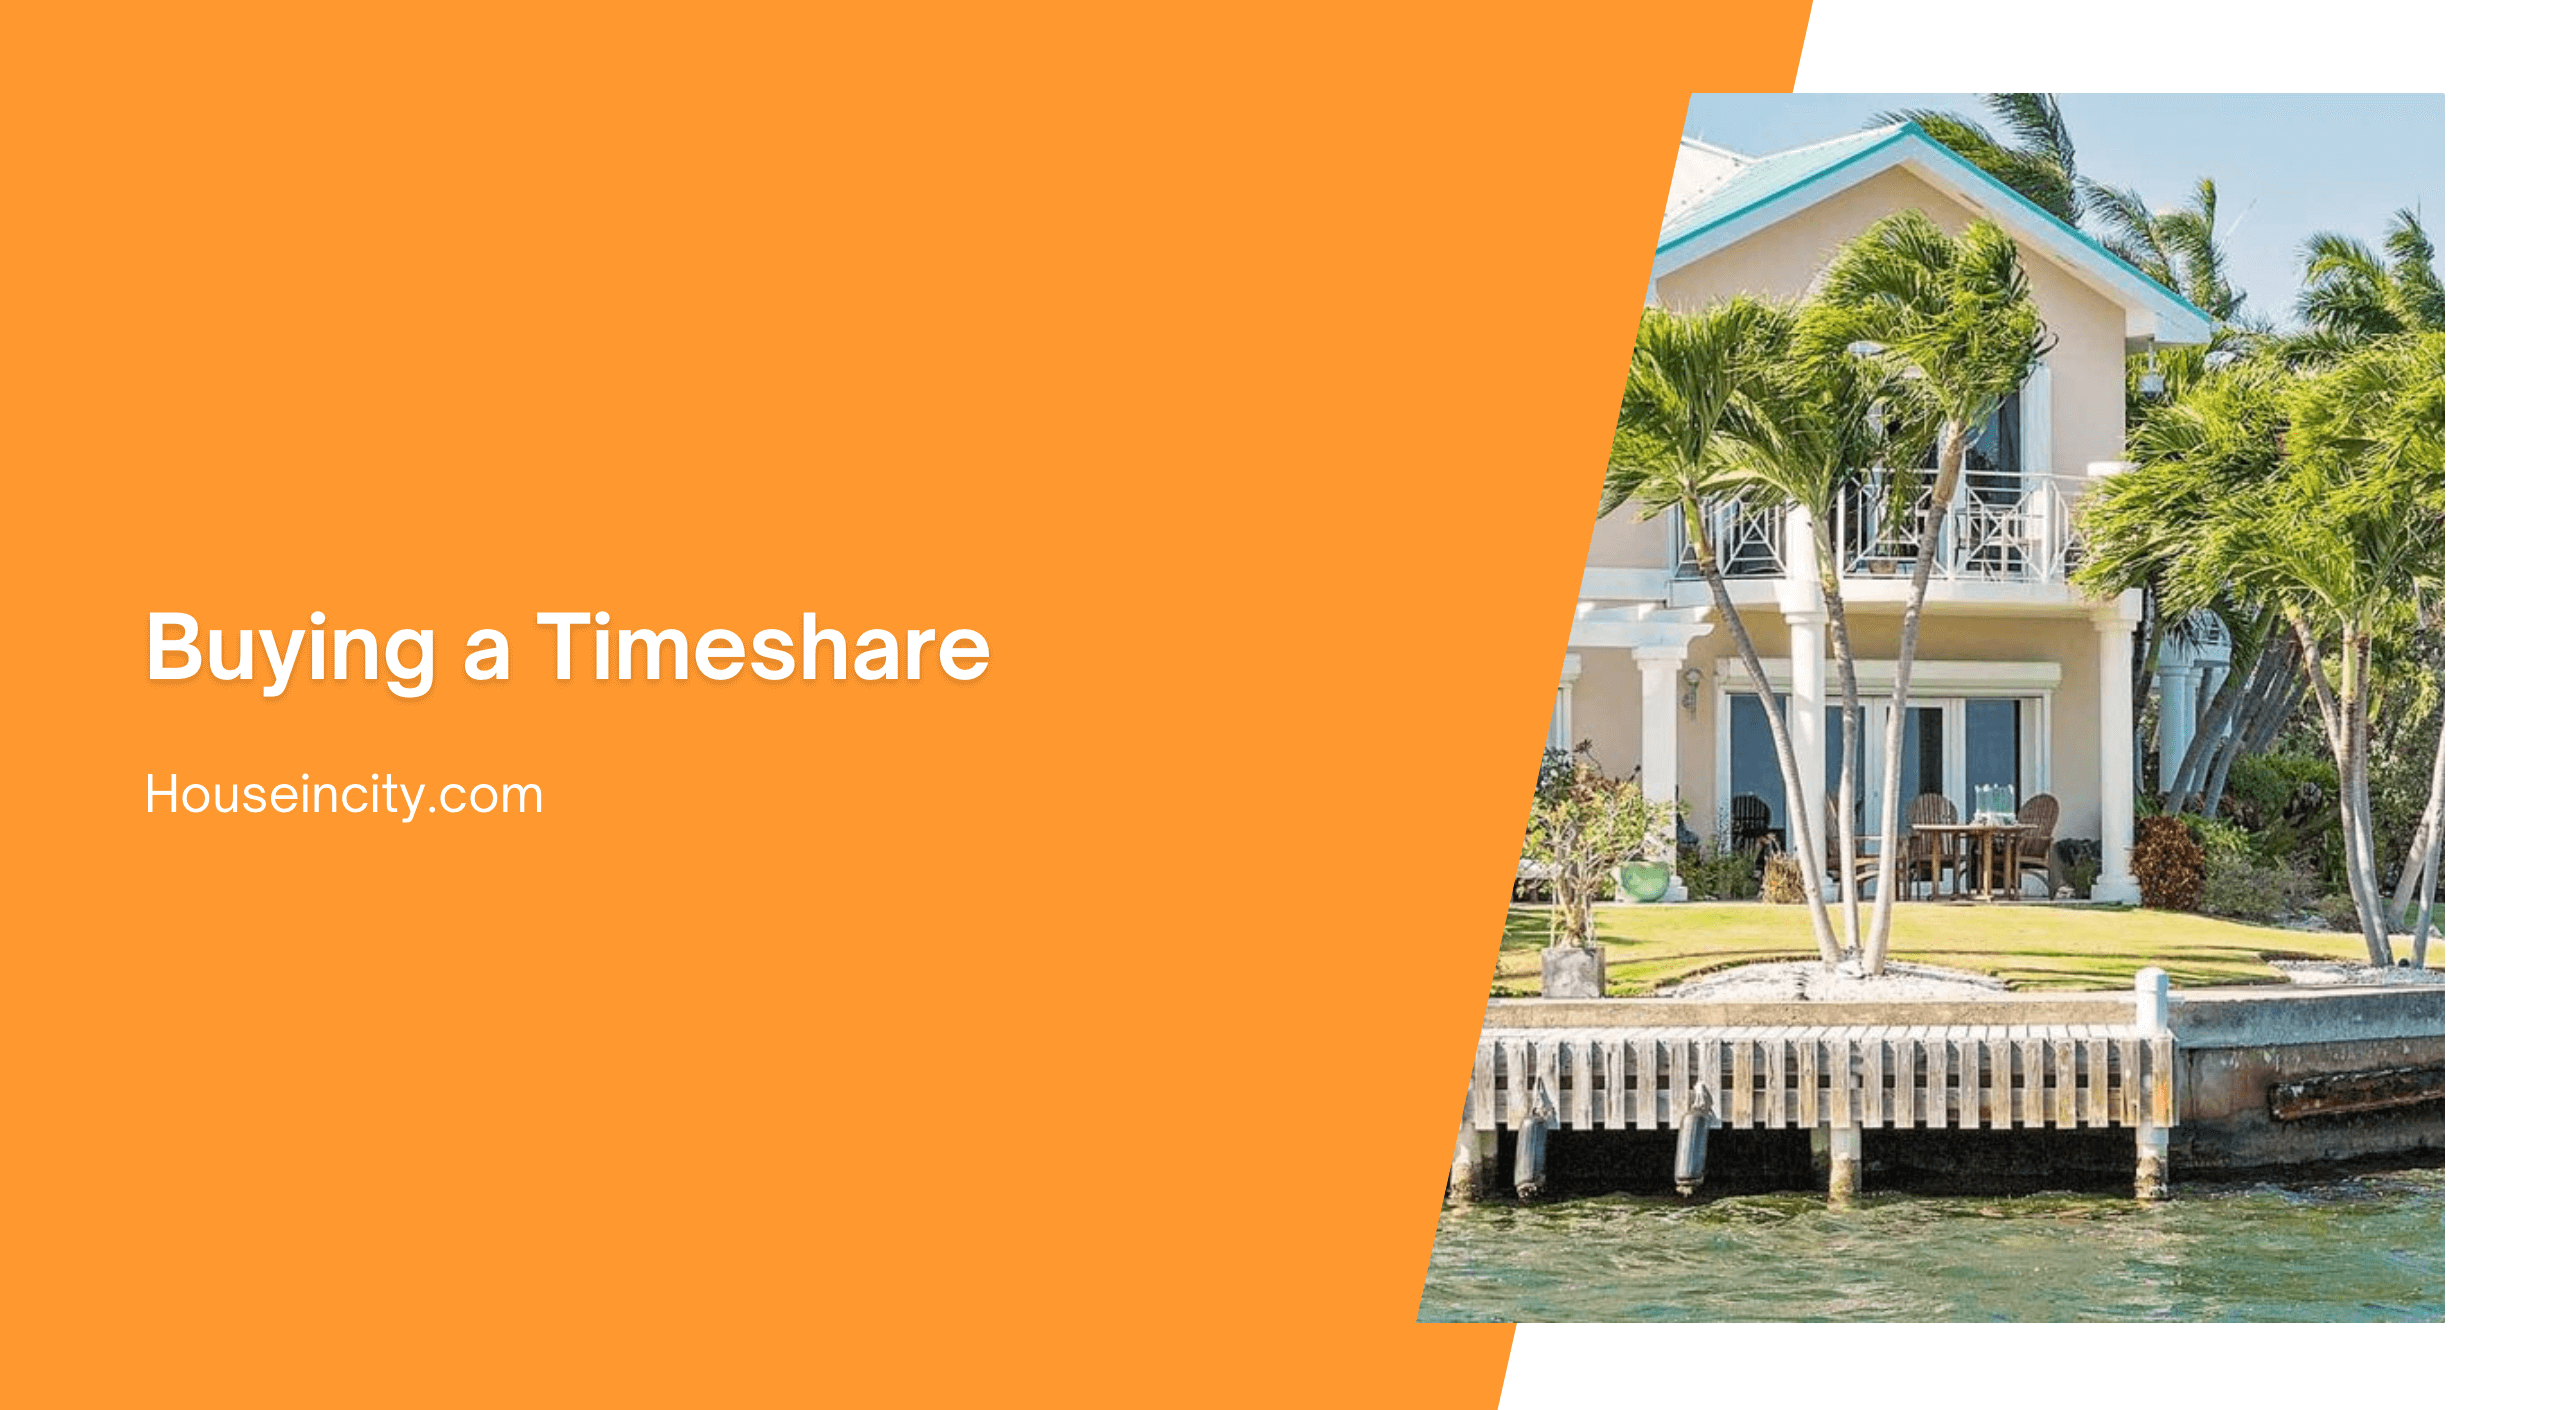 Buying a Timeshare